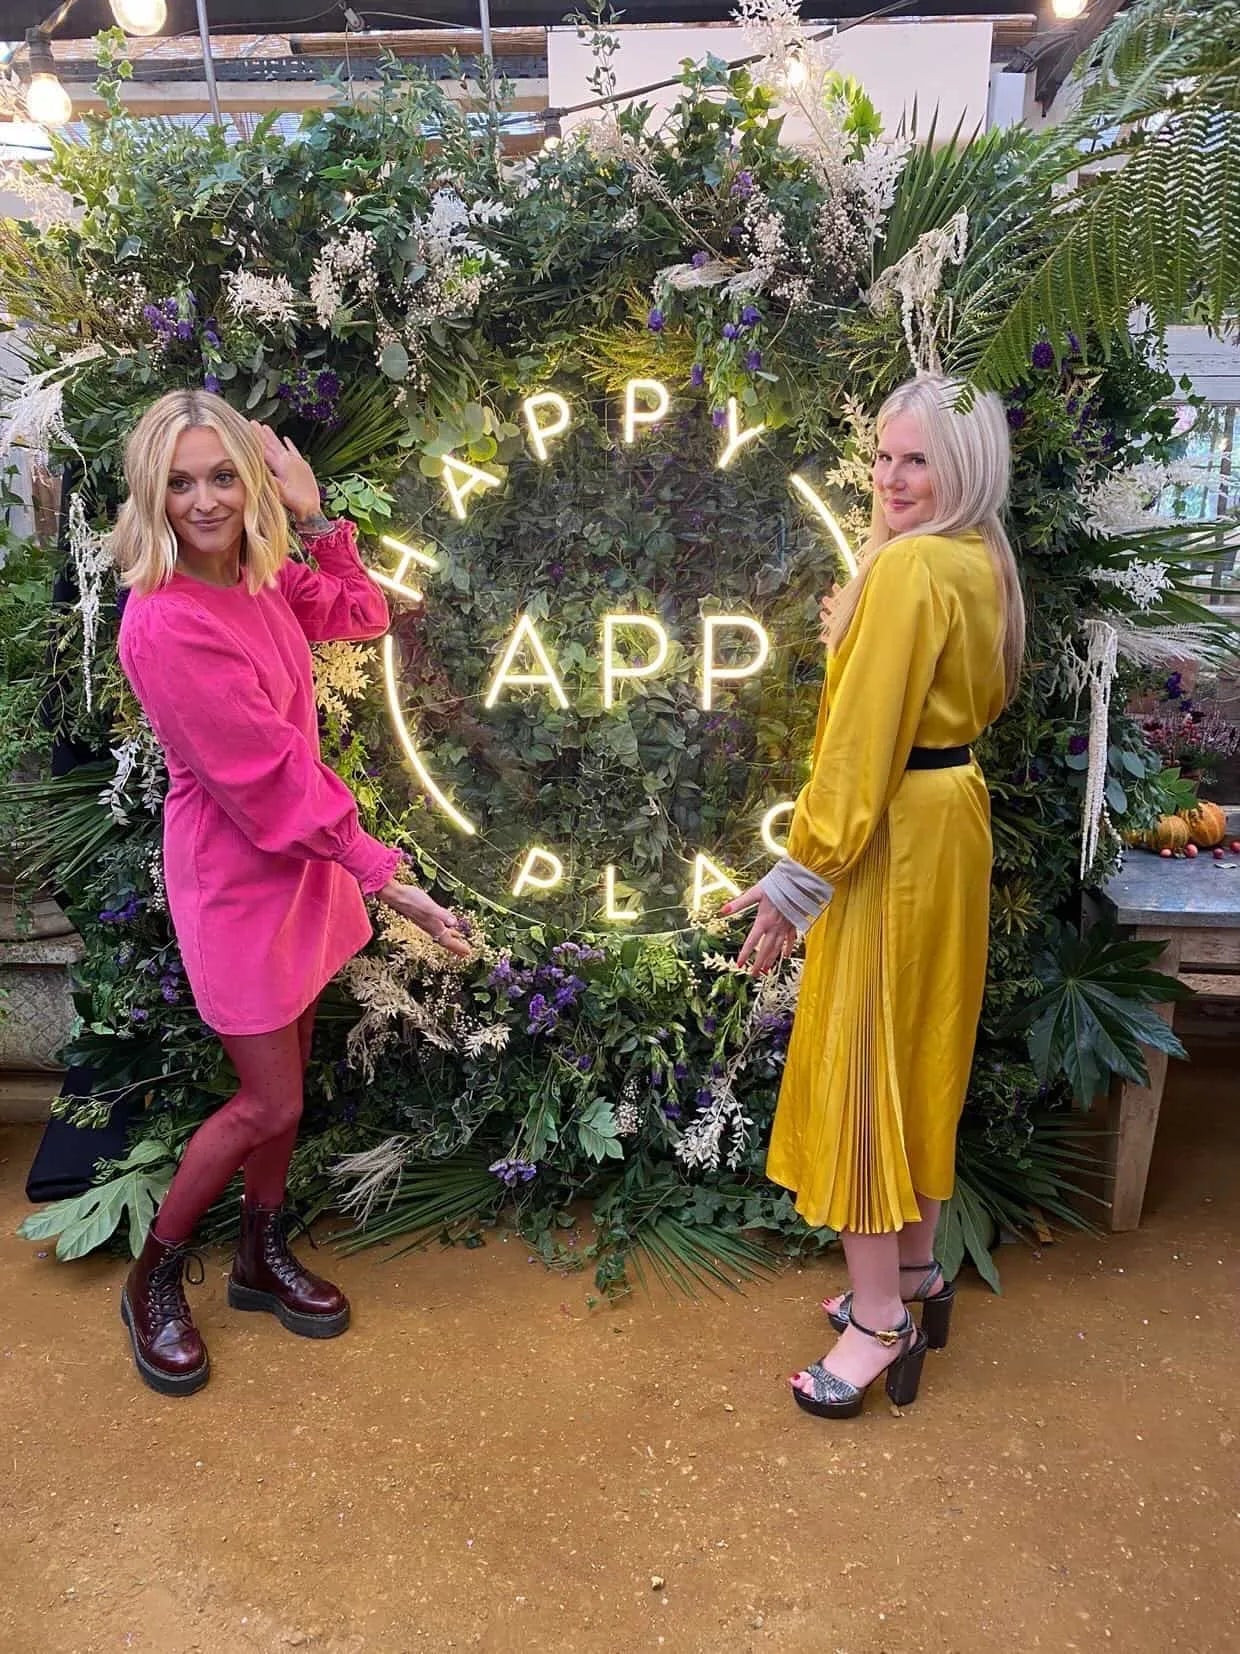 For Fearne Cotton’s Happy App launch, she partnered with event florist Amaranté London to create a beautiful bespoke flower wall